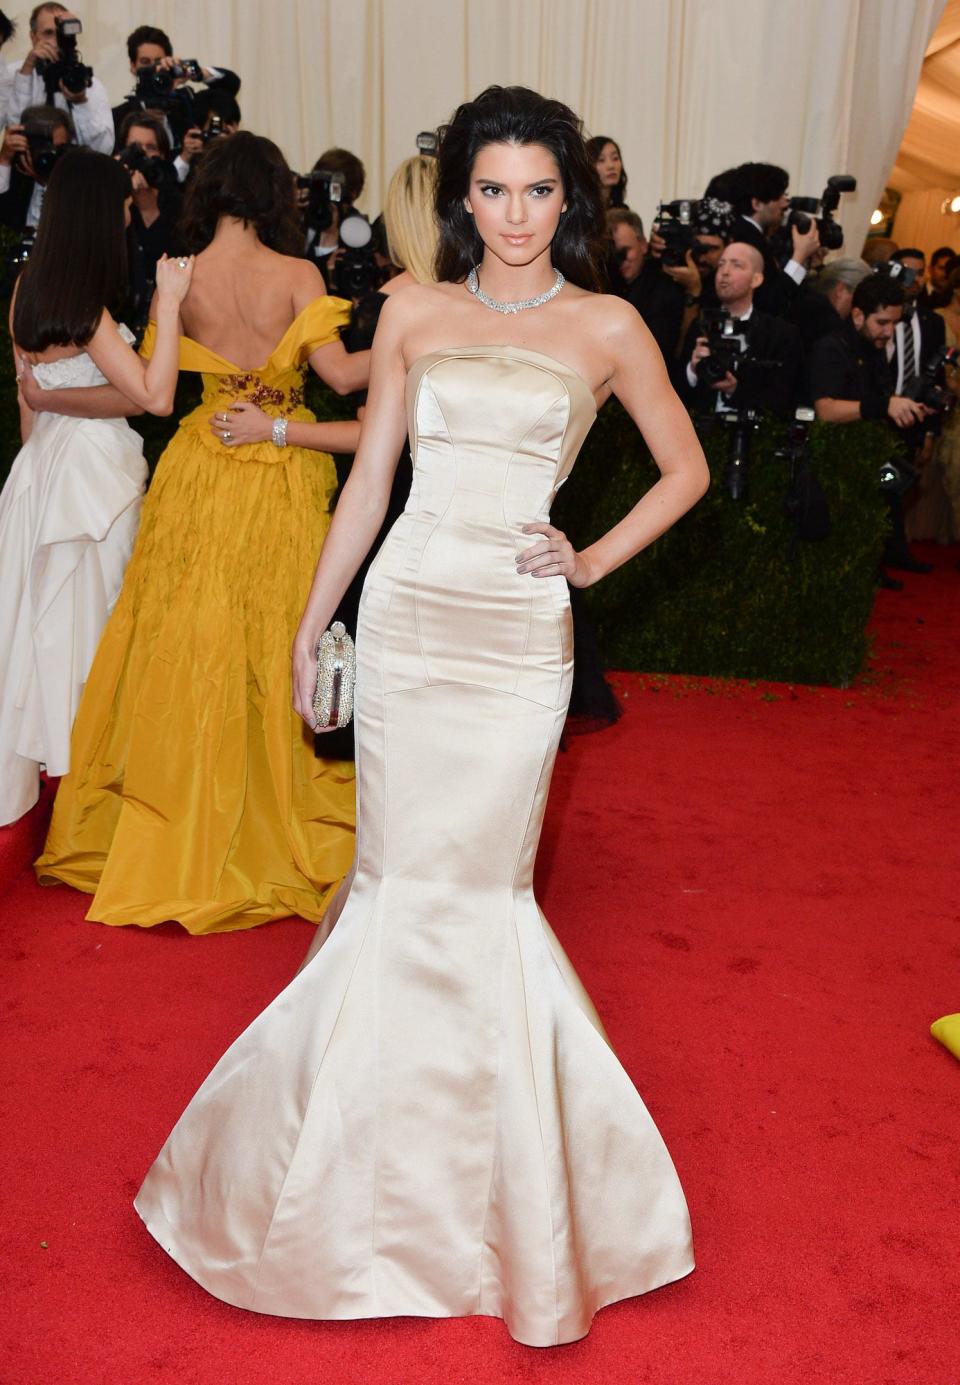 Kendall Jenner at the Met Gala in New York City on May 5, 2014.